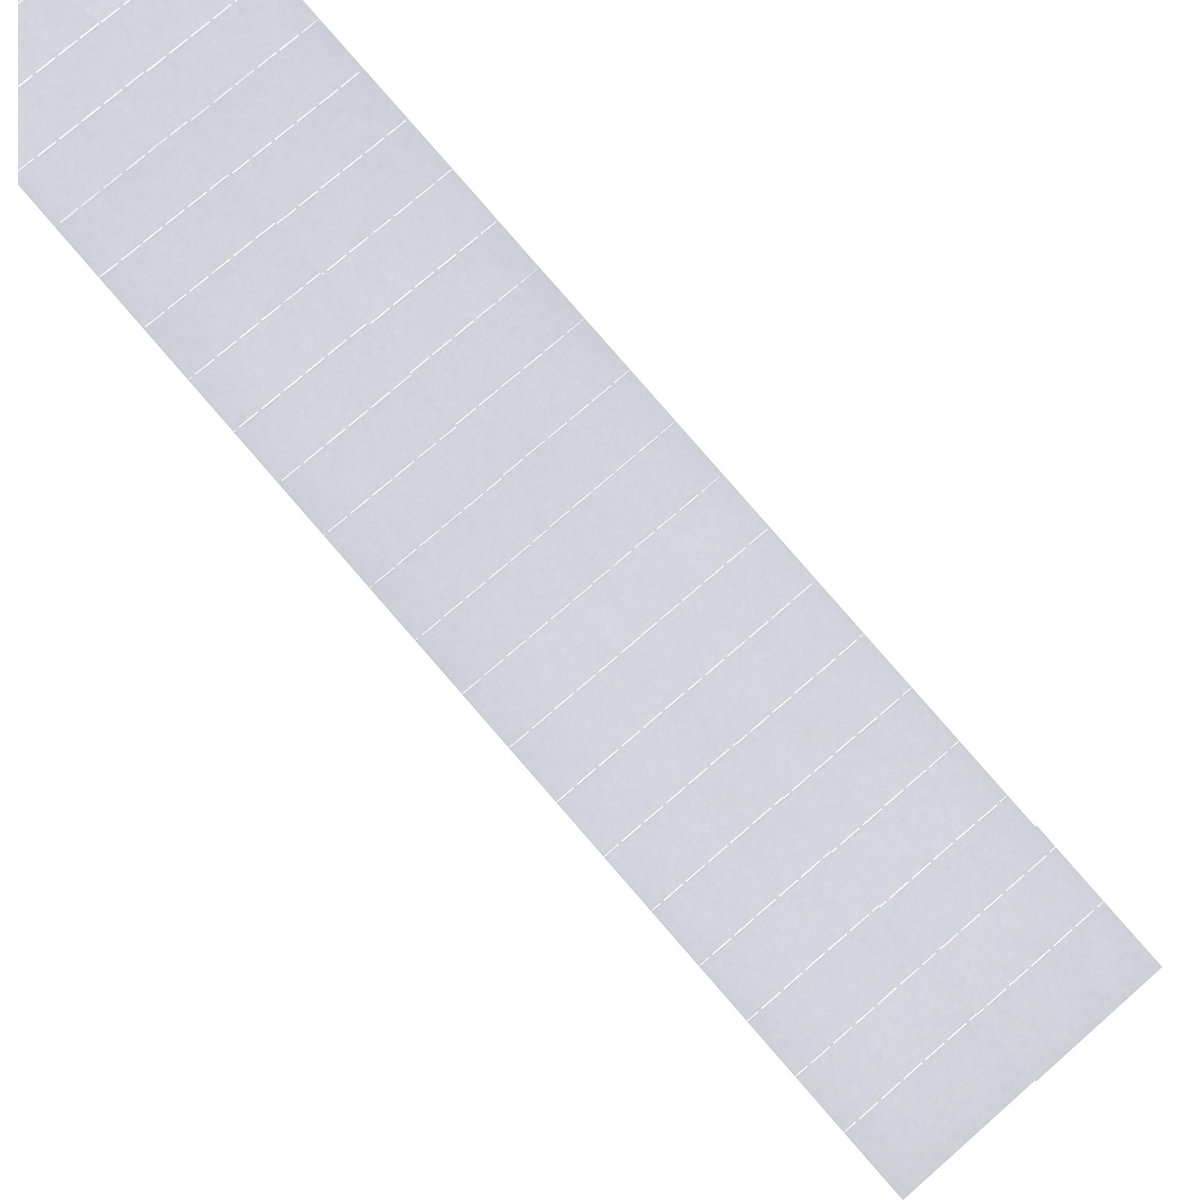 ferrocard labels – magnetoplan, HxW 15 x 50 mm, pack of 345, white-4